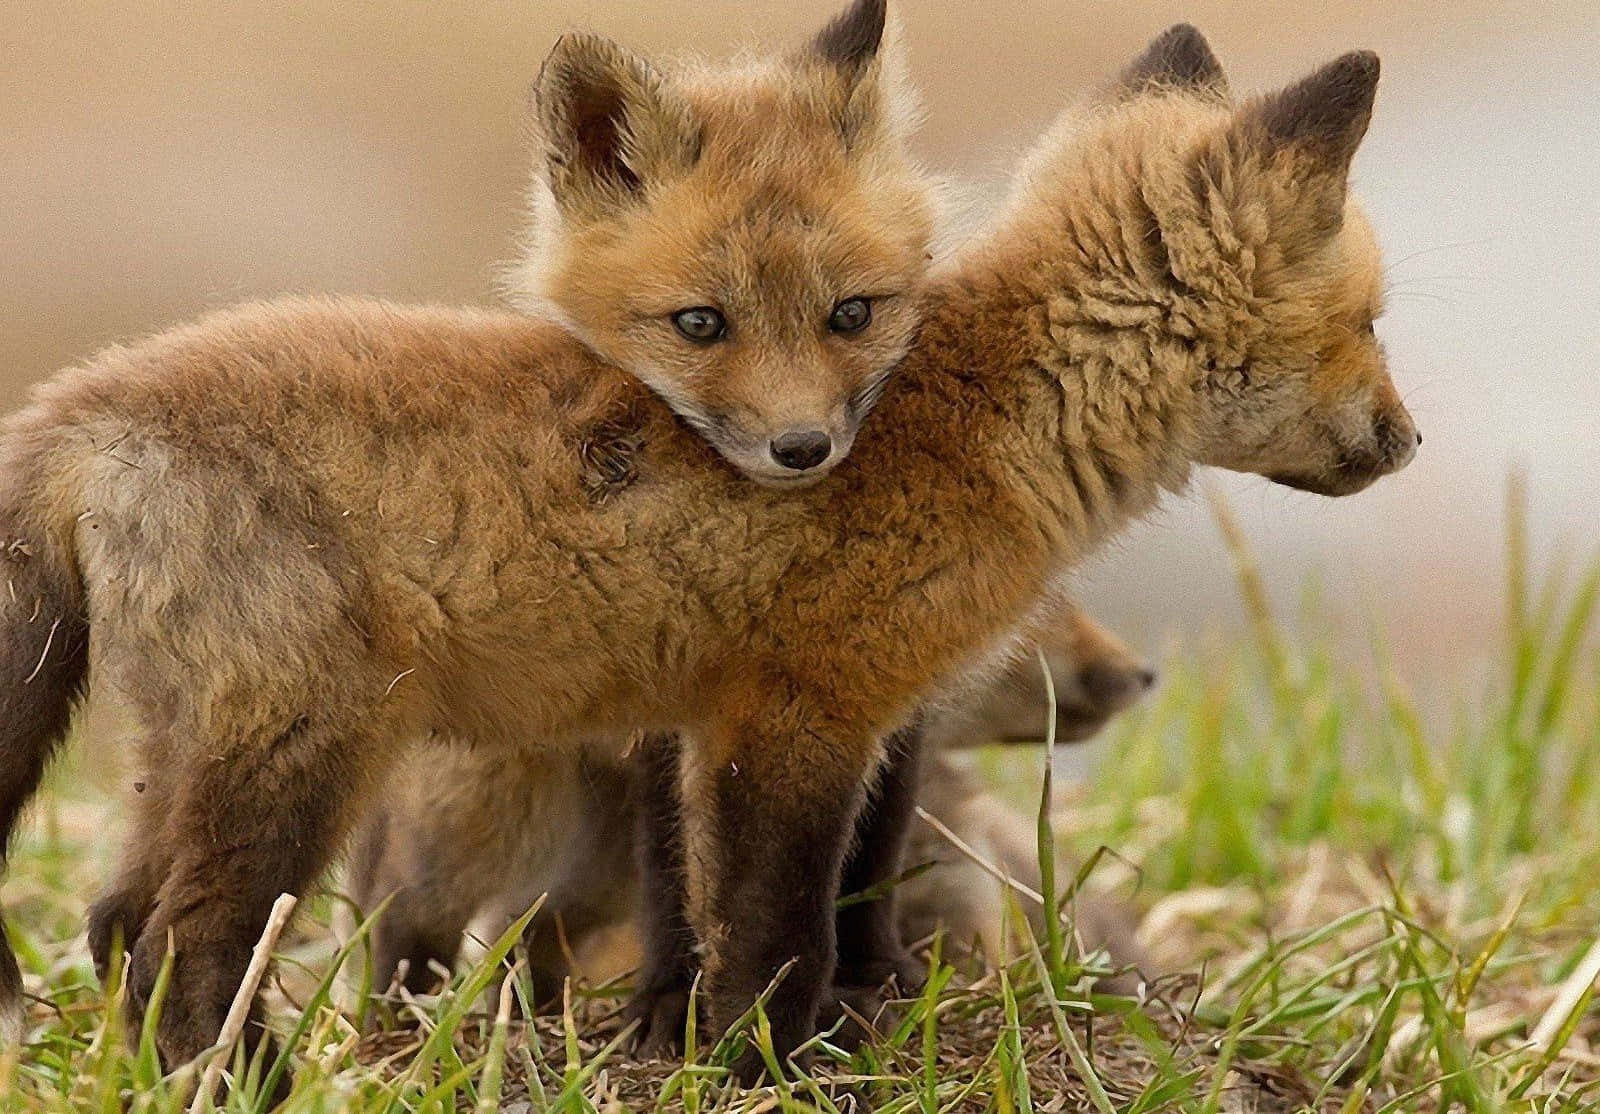 Take a closer look and see the cuteness of this fox!